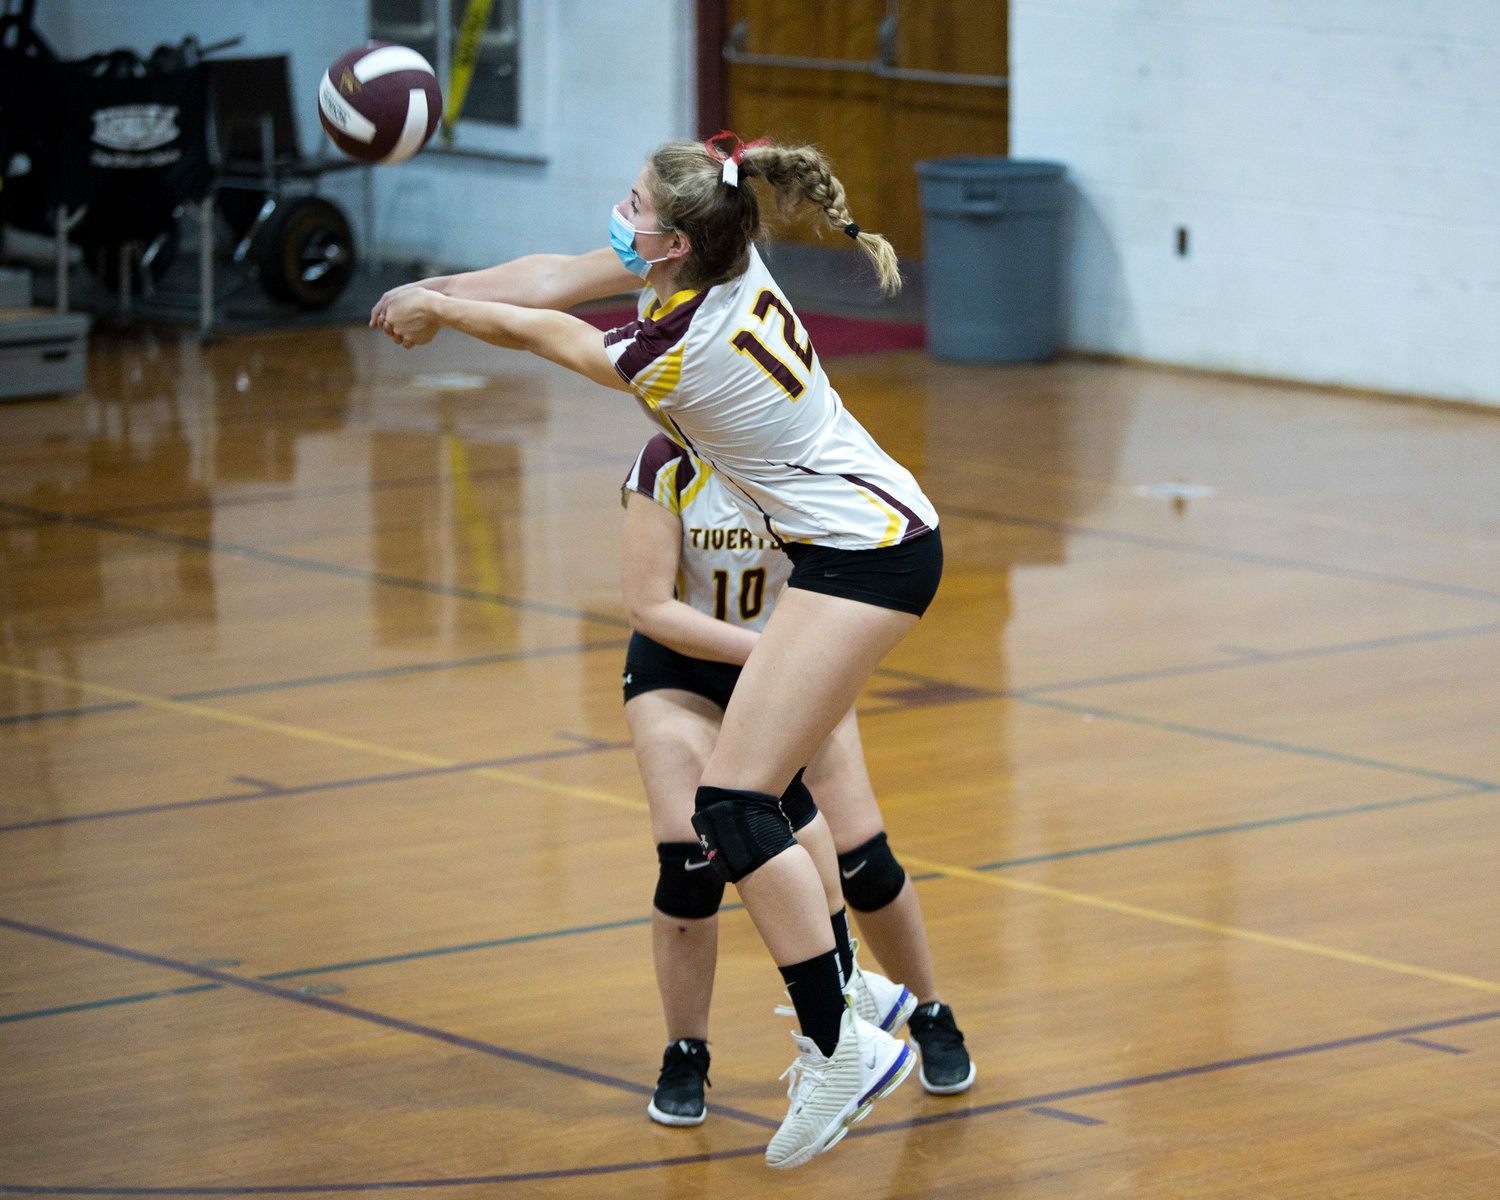 Molly Richardson sends the ball back over the net during Friday night's game against Times Two Academy.